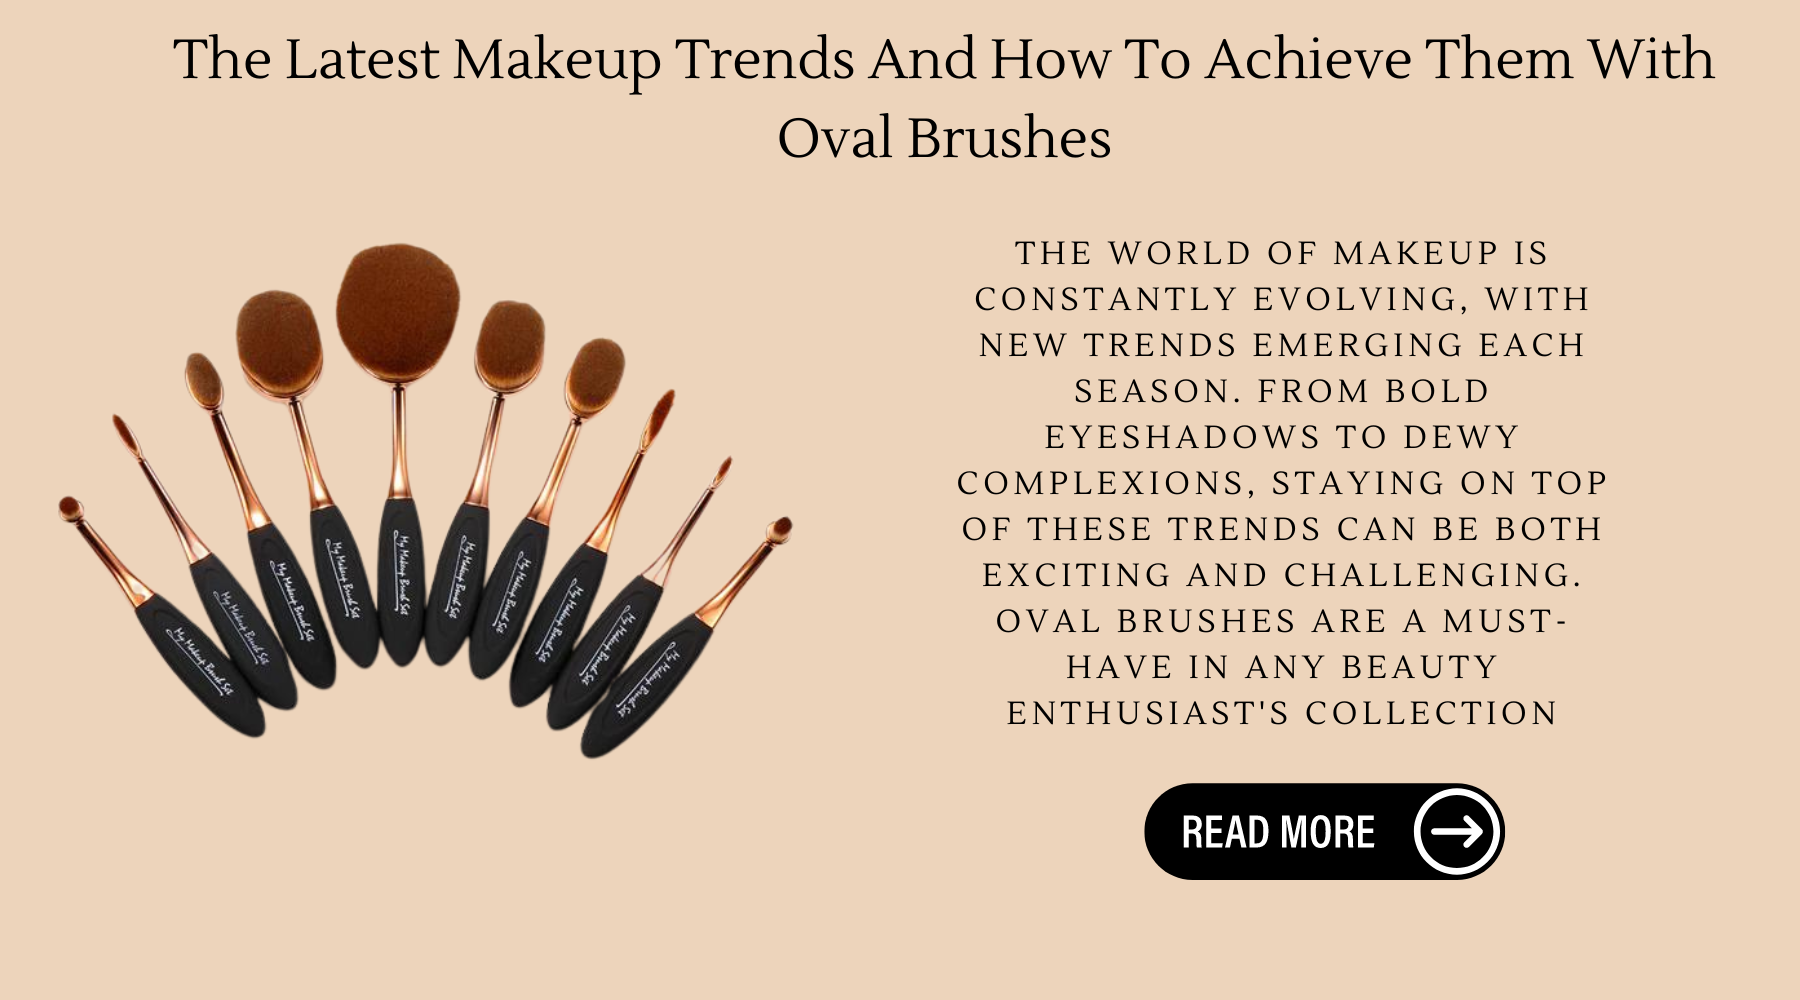 The Latest Makeup Trends And How To Achieve Them With Oval Brushes